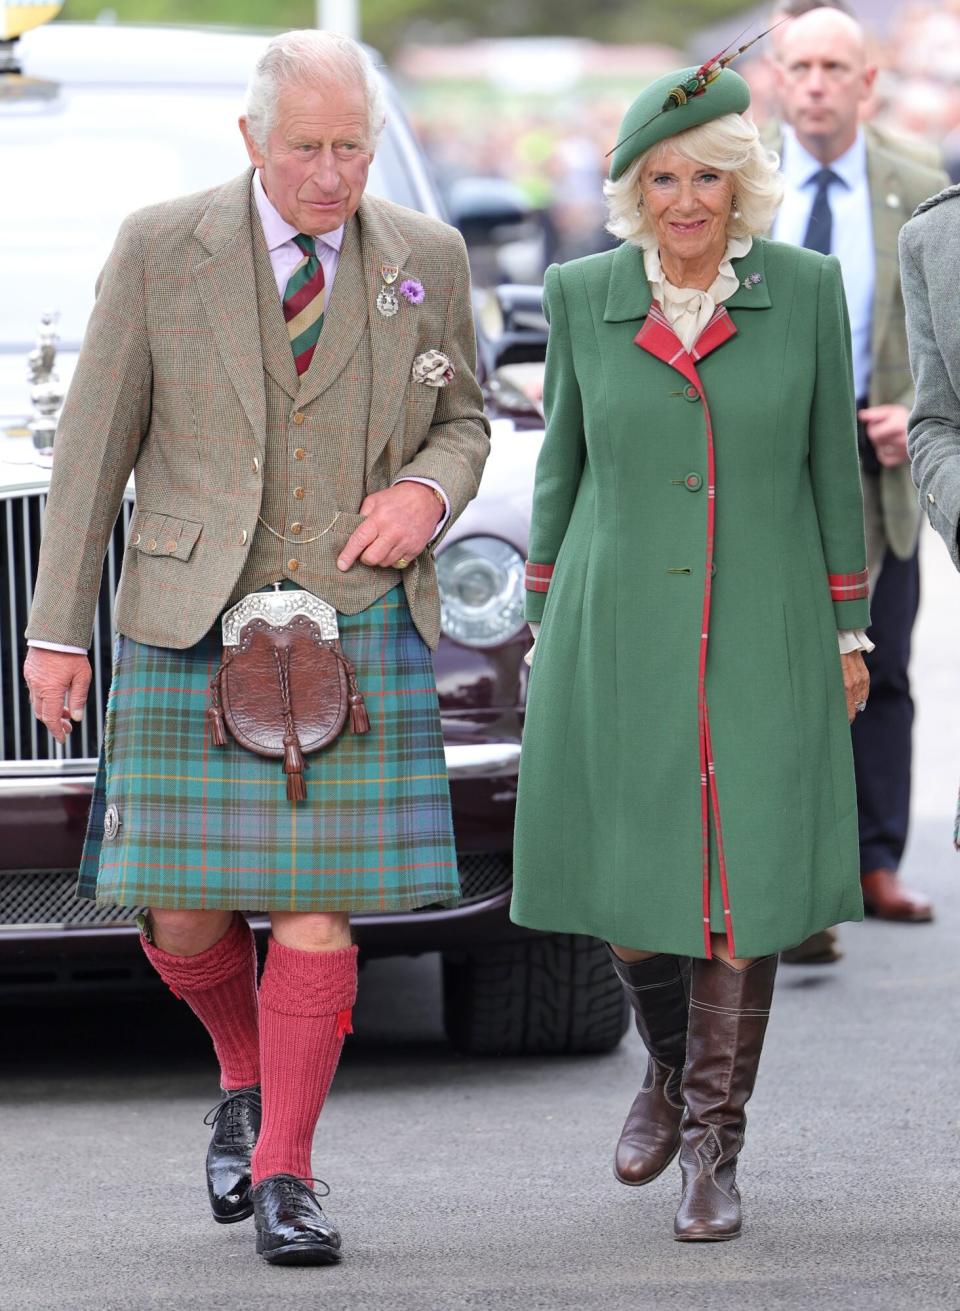 BRAEMAR, SCOTLAND - SEPTEMBER 03: Prince Charles, Prince of Wales, known as the Duke of Rothesay when in Scotland and Camilla, Duchess of Cornwall attend the Braemar Highland Gathering at the Princess Royal &amp; Duke of Fife Memorial Park on September 03, 2022 in Braemar, Scotland. The Braemar Gathering is the most famous of the Highland Games and is known worldwide. Each year thousands of visitors descend on this small Scottish village on the first Saturday in September to watch one of the more colourful Scottish traditions. The Gathering has a long history and in its modern form it stretches back nearly 200 years. The Queen Elizabeth Platinum Jubilee Archway was designed by architect Keith Ross, erected to celebrate 70 years of Her Majesty as monarch and as Patron of The Braemar Royal Highland Society, organiser of the annual Braemar Gathering. (Photo by Chris Jackson/Getty Images)